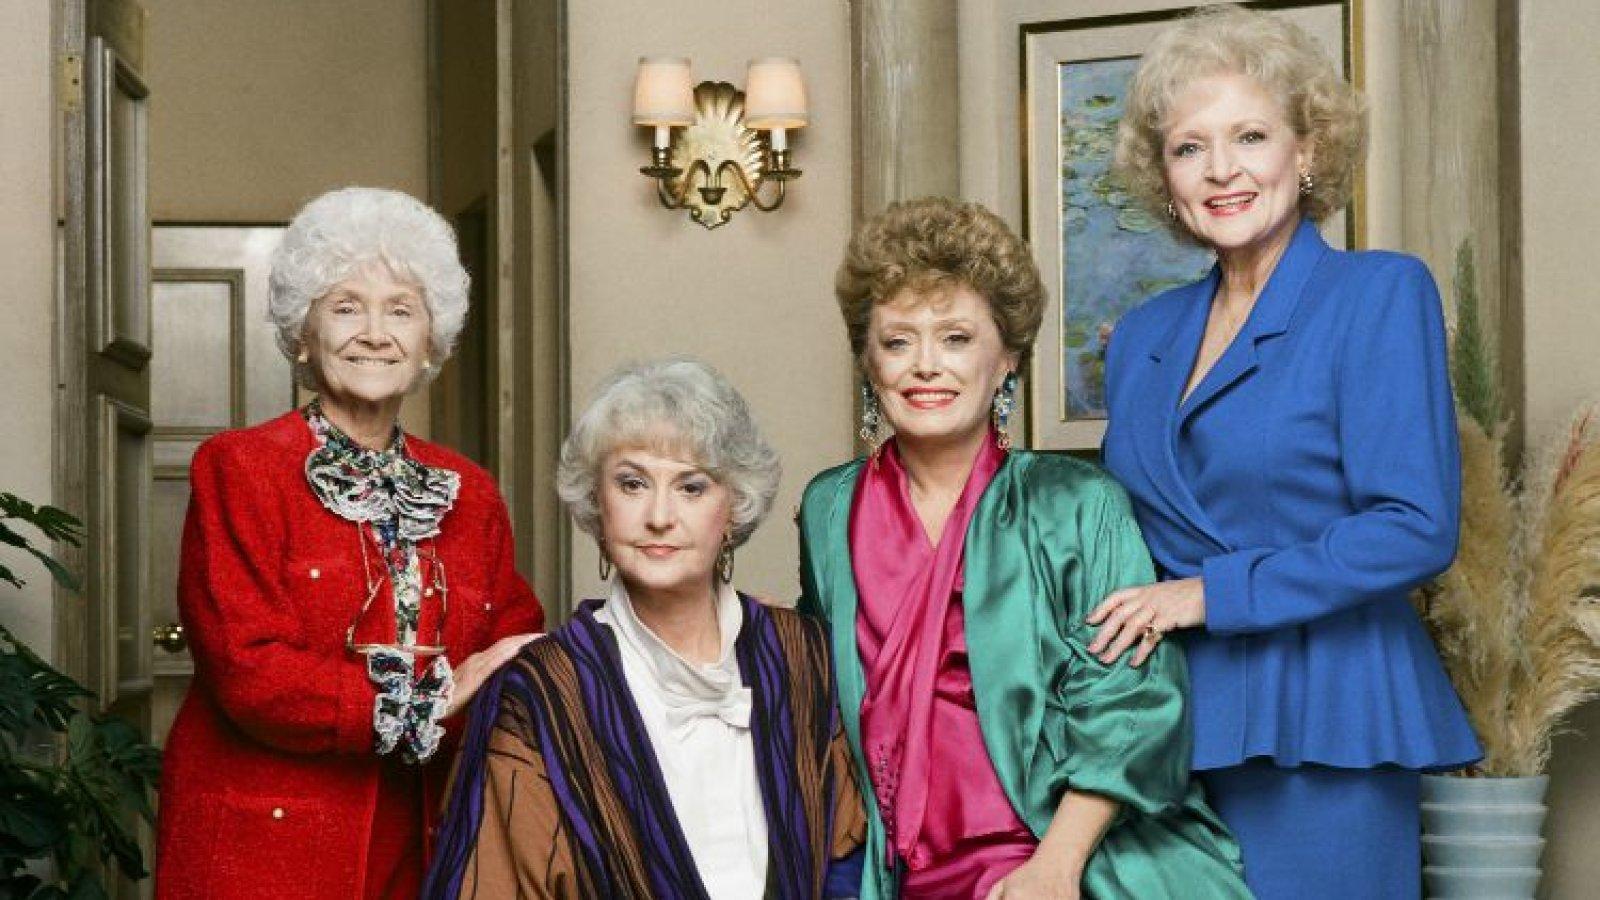 Things Every Fan of The Golden Girls Should Own